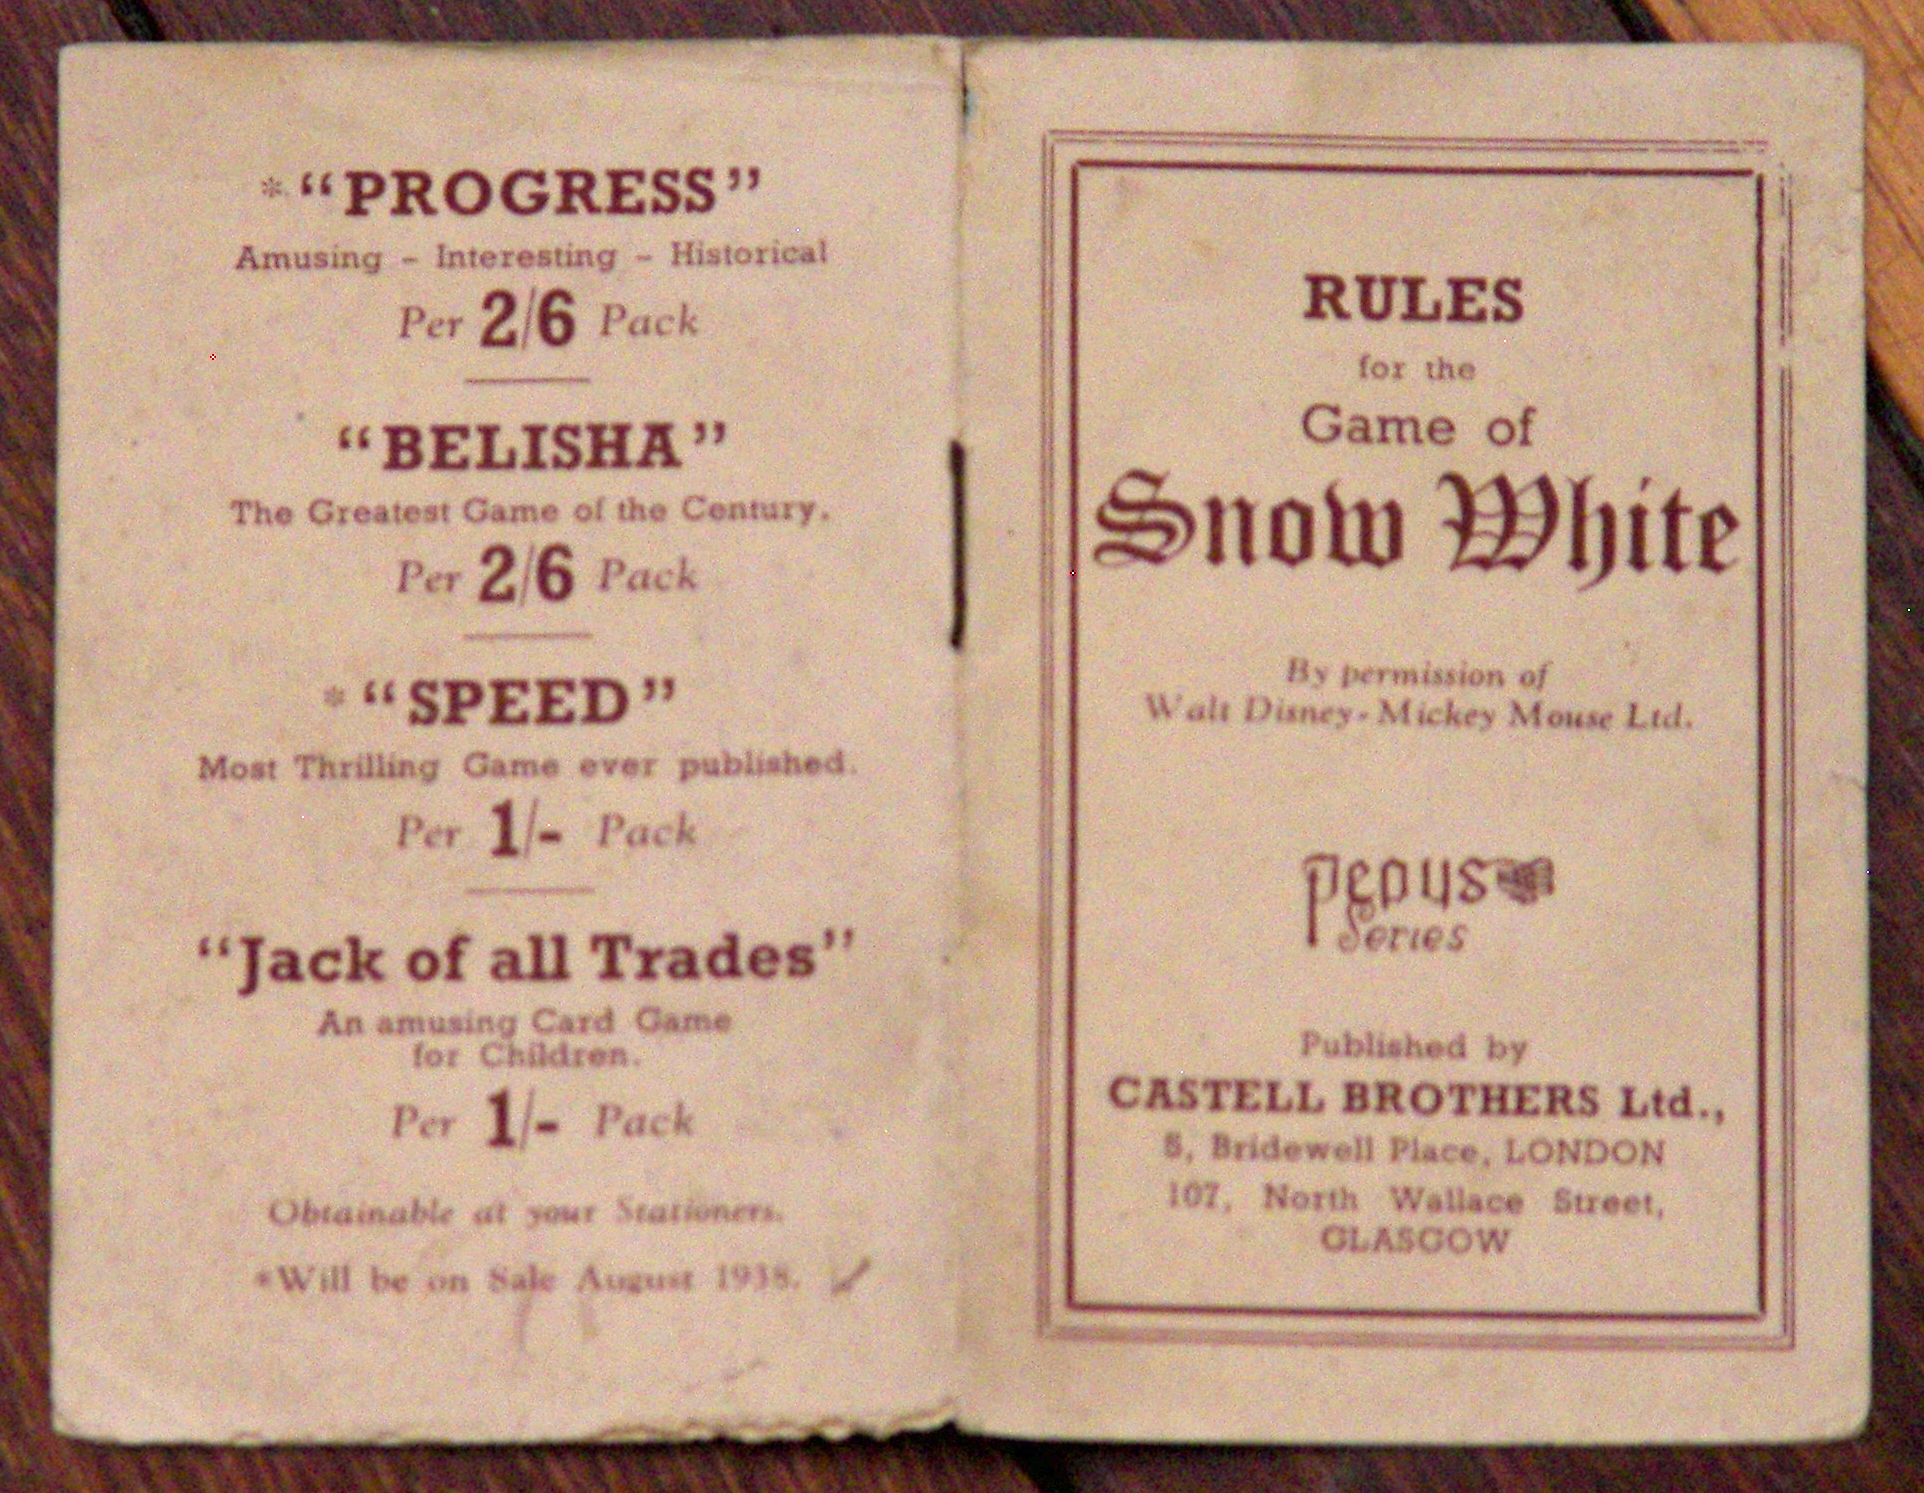 Filmic Light - Snow White Archive: Snow White Pepys Card Game by Castell,  1937-38